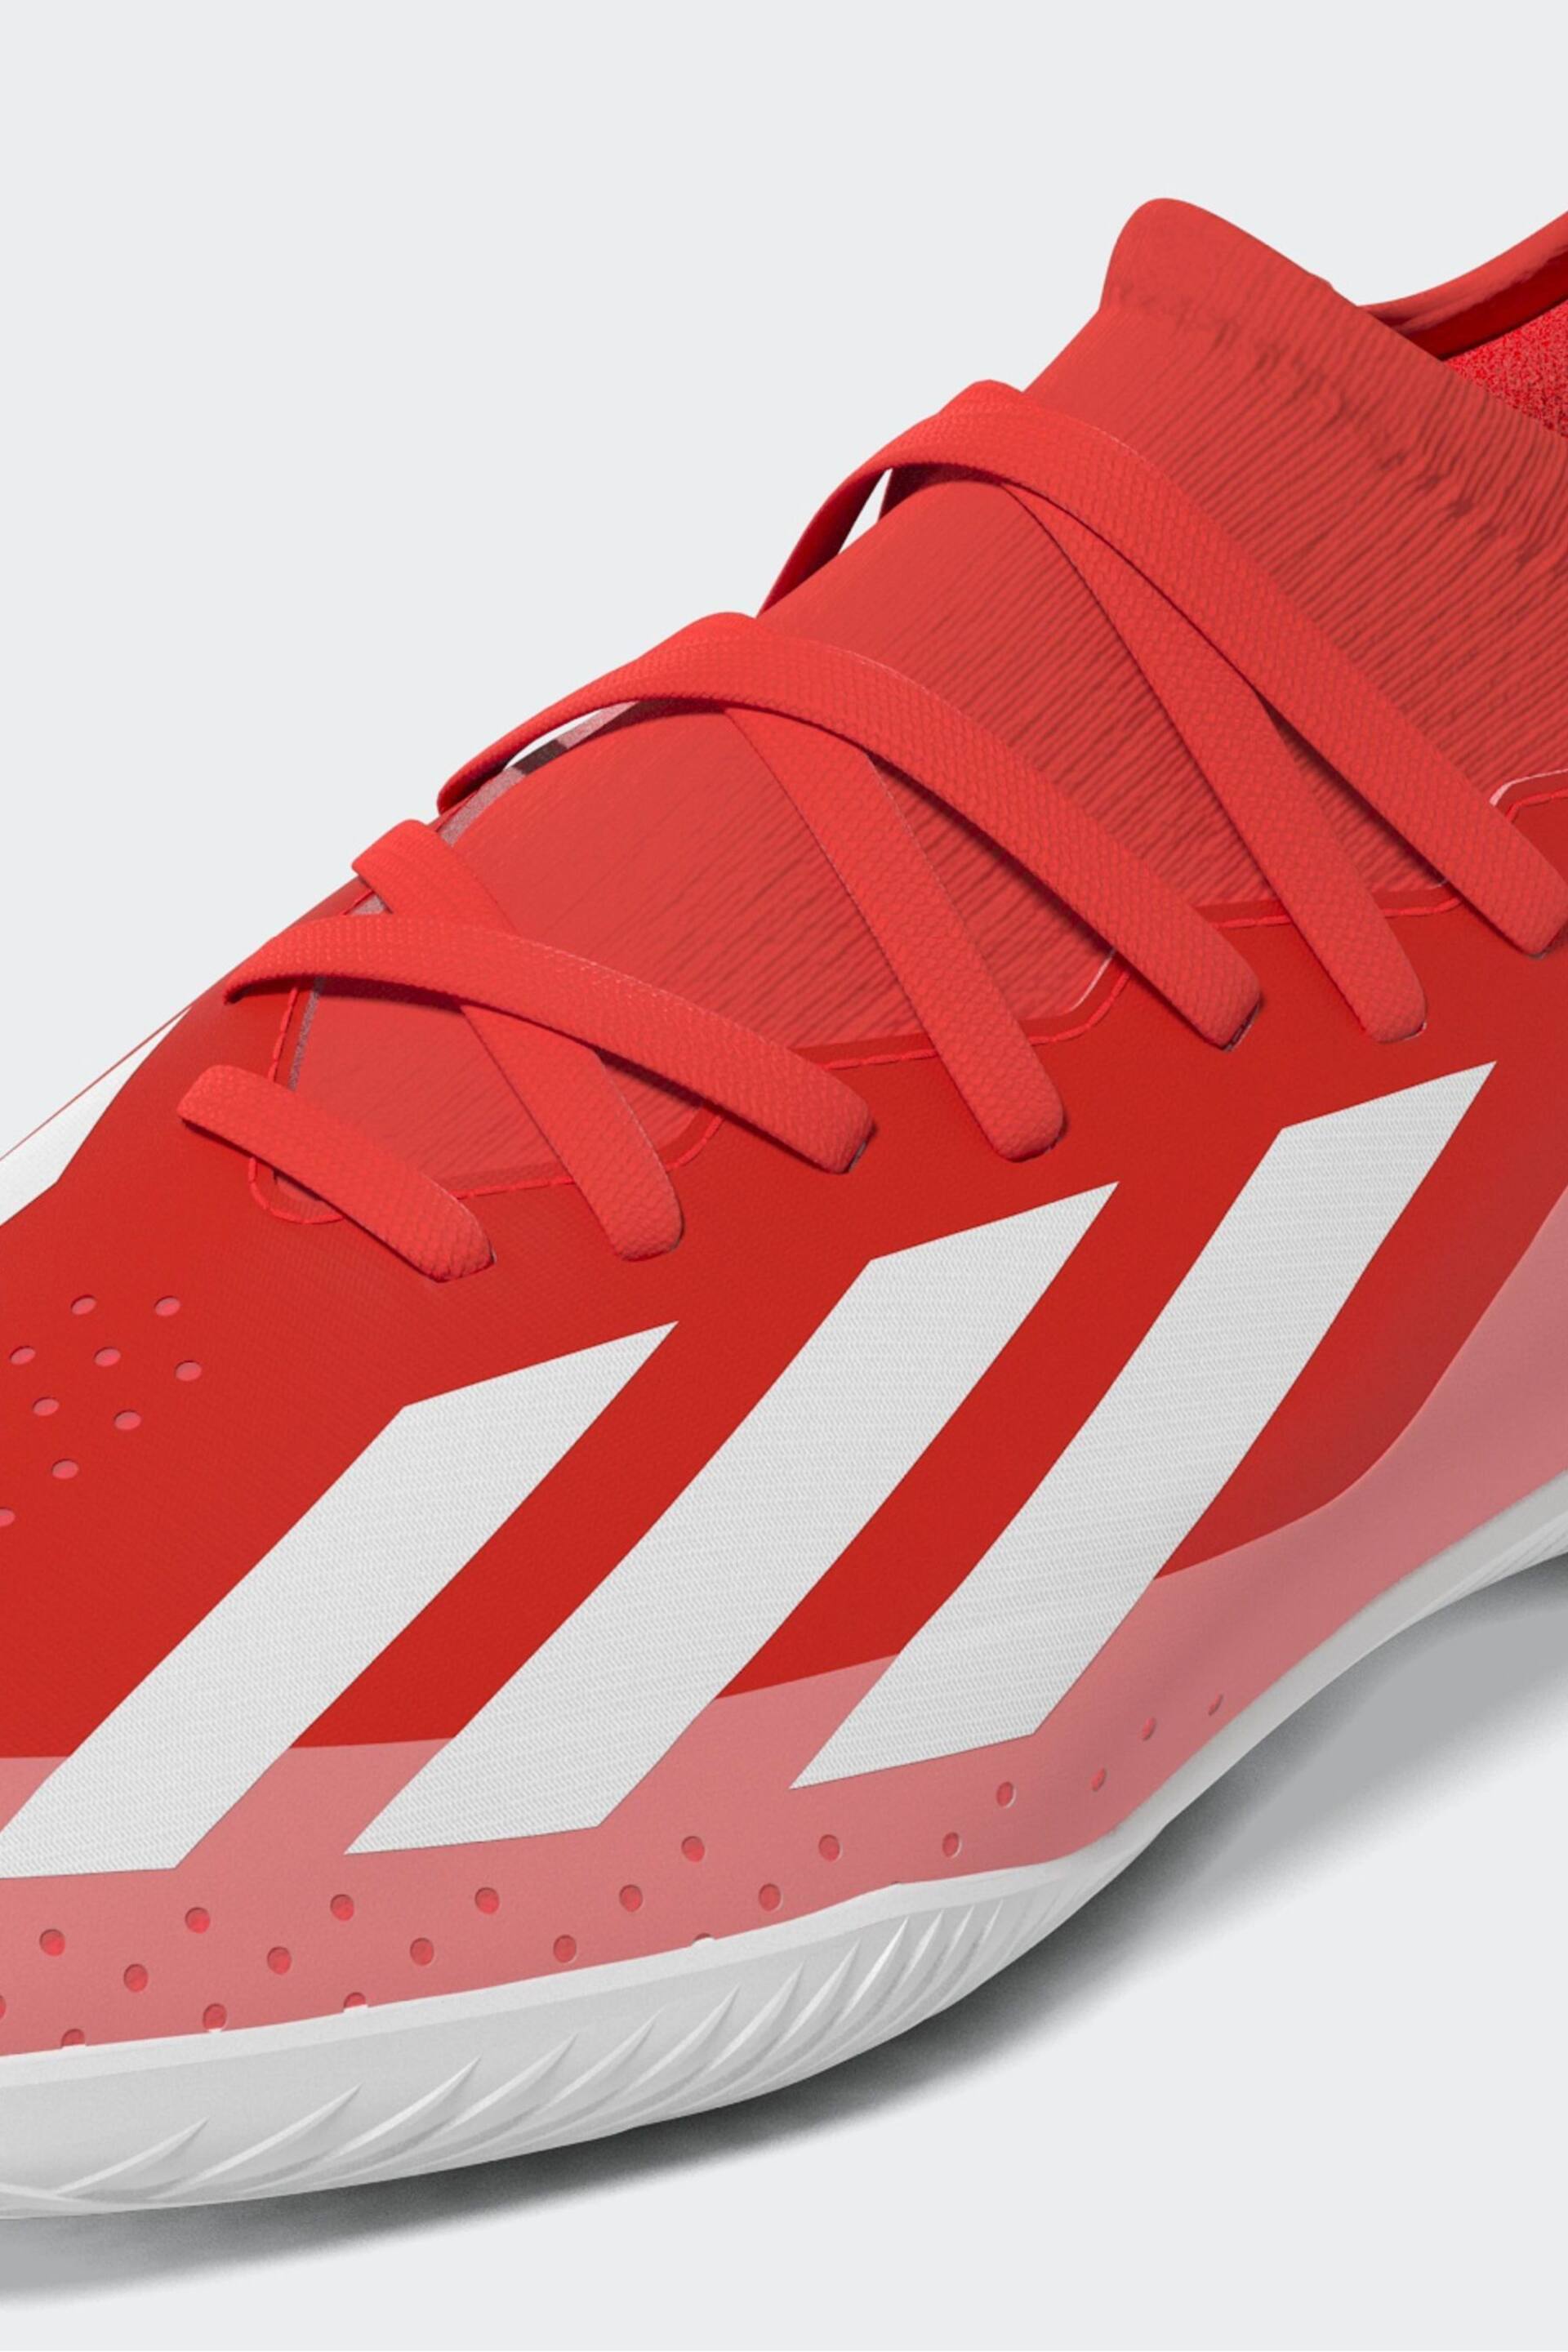 adidas Red/White Football X Crazyfast League Indoor Kids Boots - Image 18 of 20